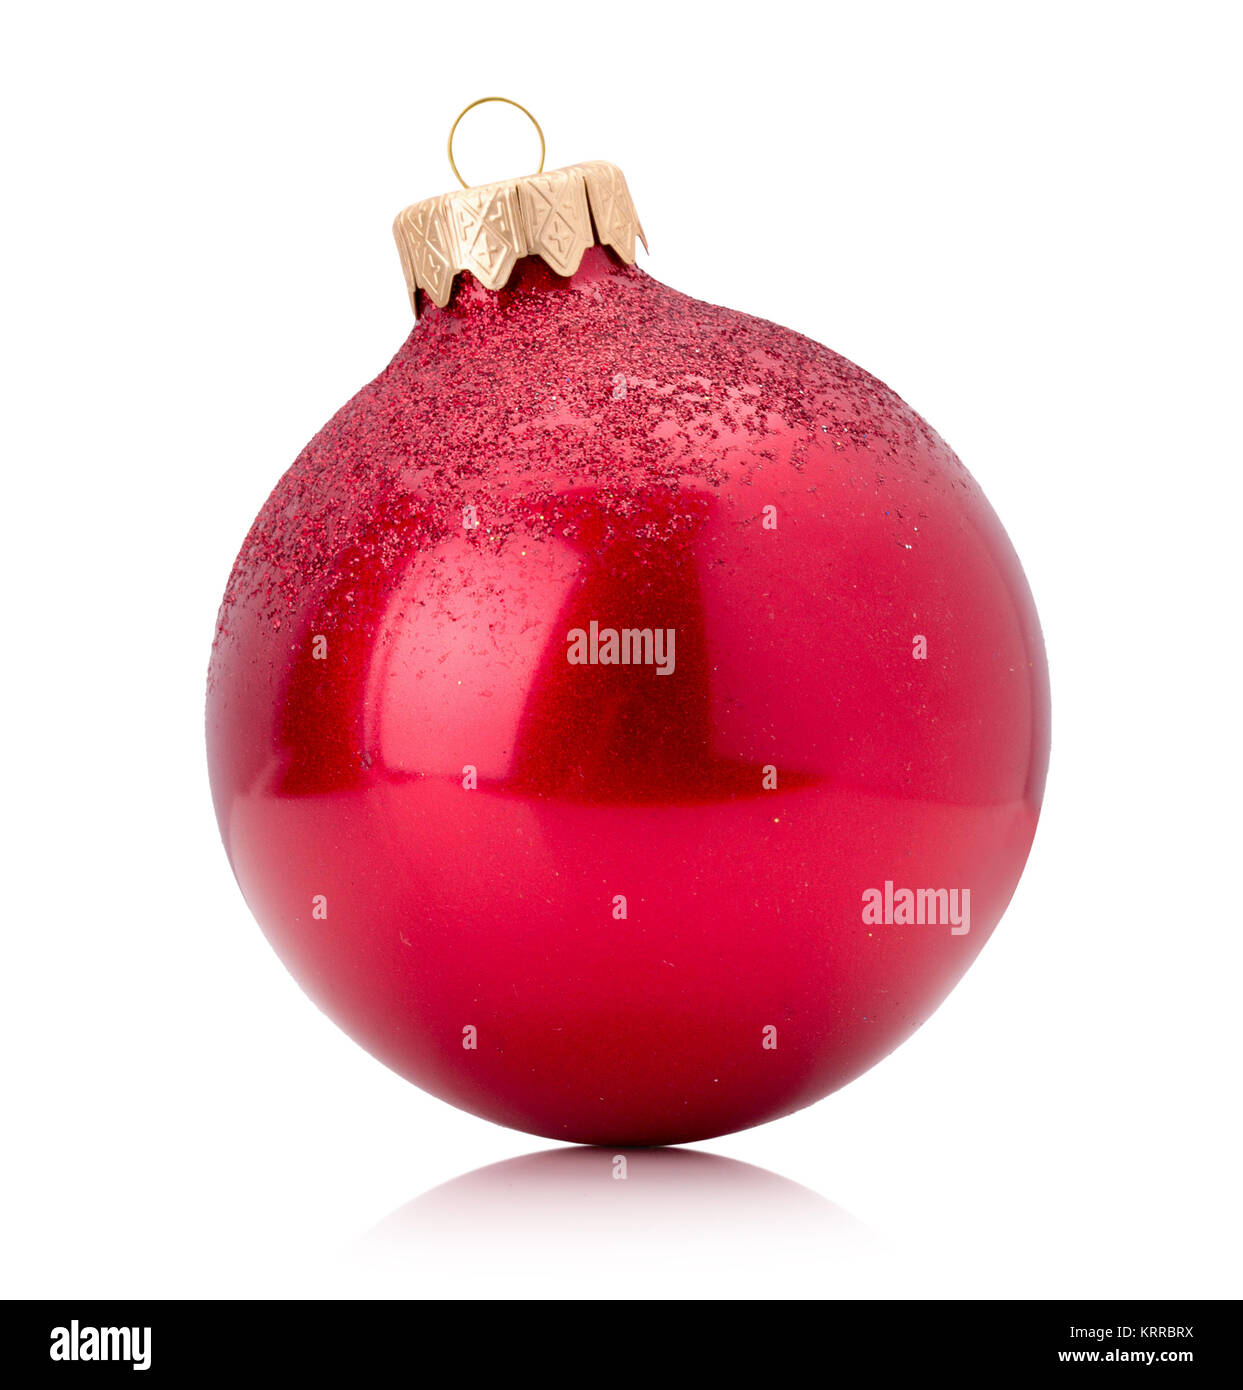 red Christmas tree ball isolated on a white background. Stock Photo